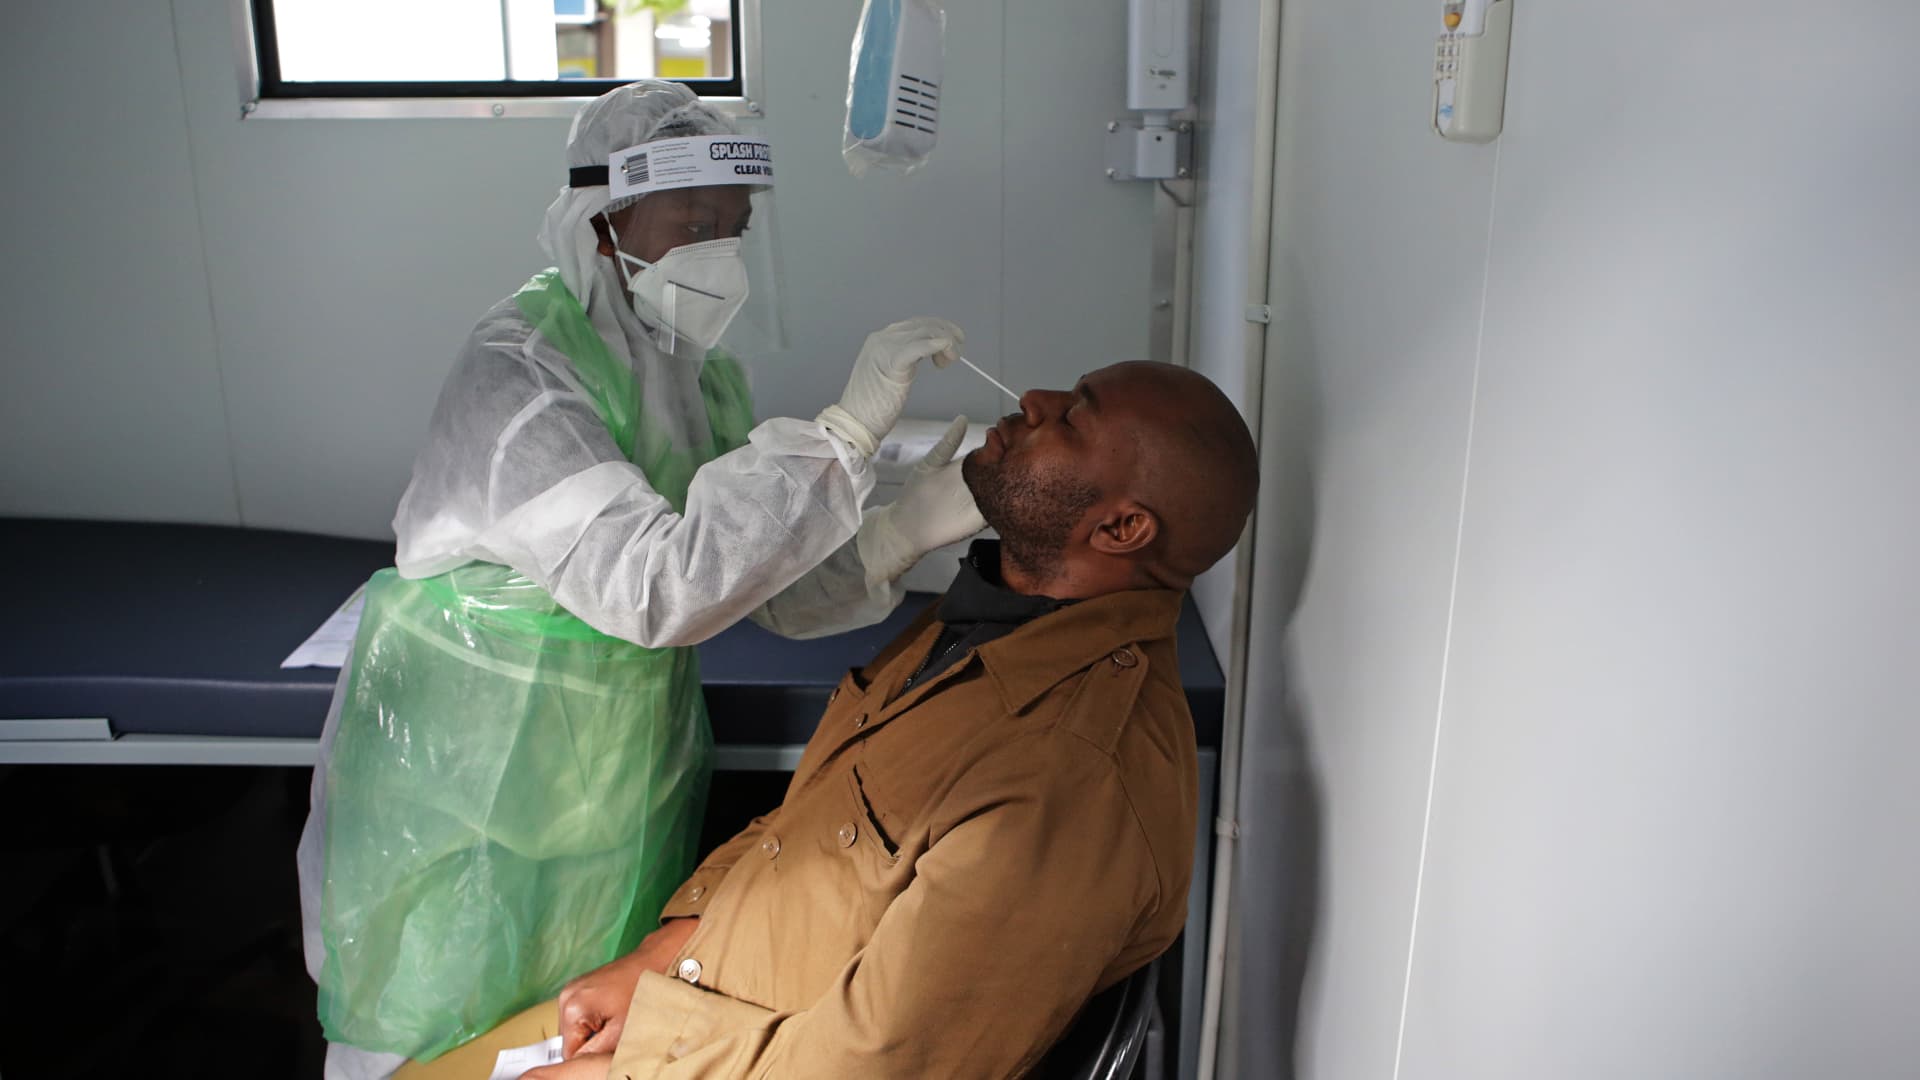 A City of Tshwane Health official takes a nasal swab to test for the COVID-19 coronavirus on a taxi operator at the Bloed Street Mall in Pretoria Central Business District, on June 11, 2020.